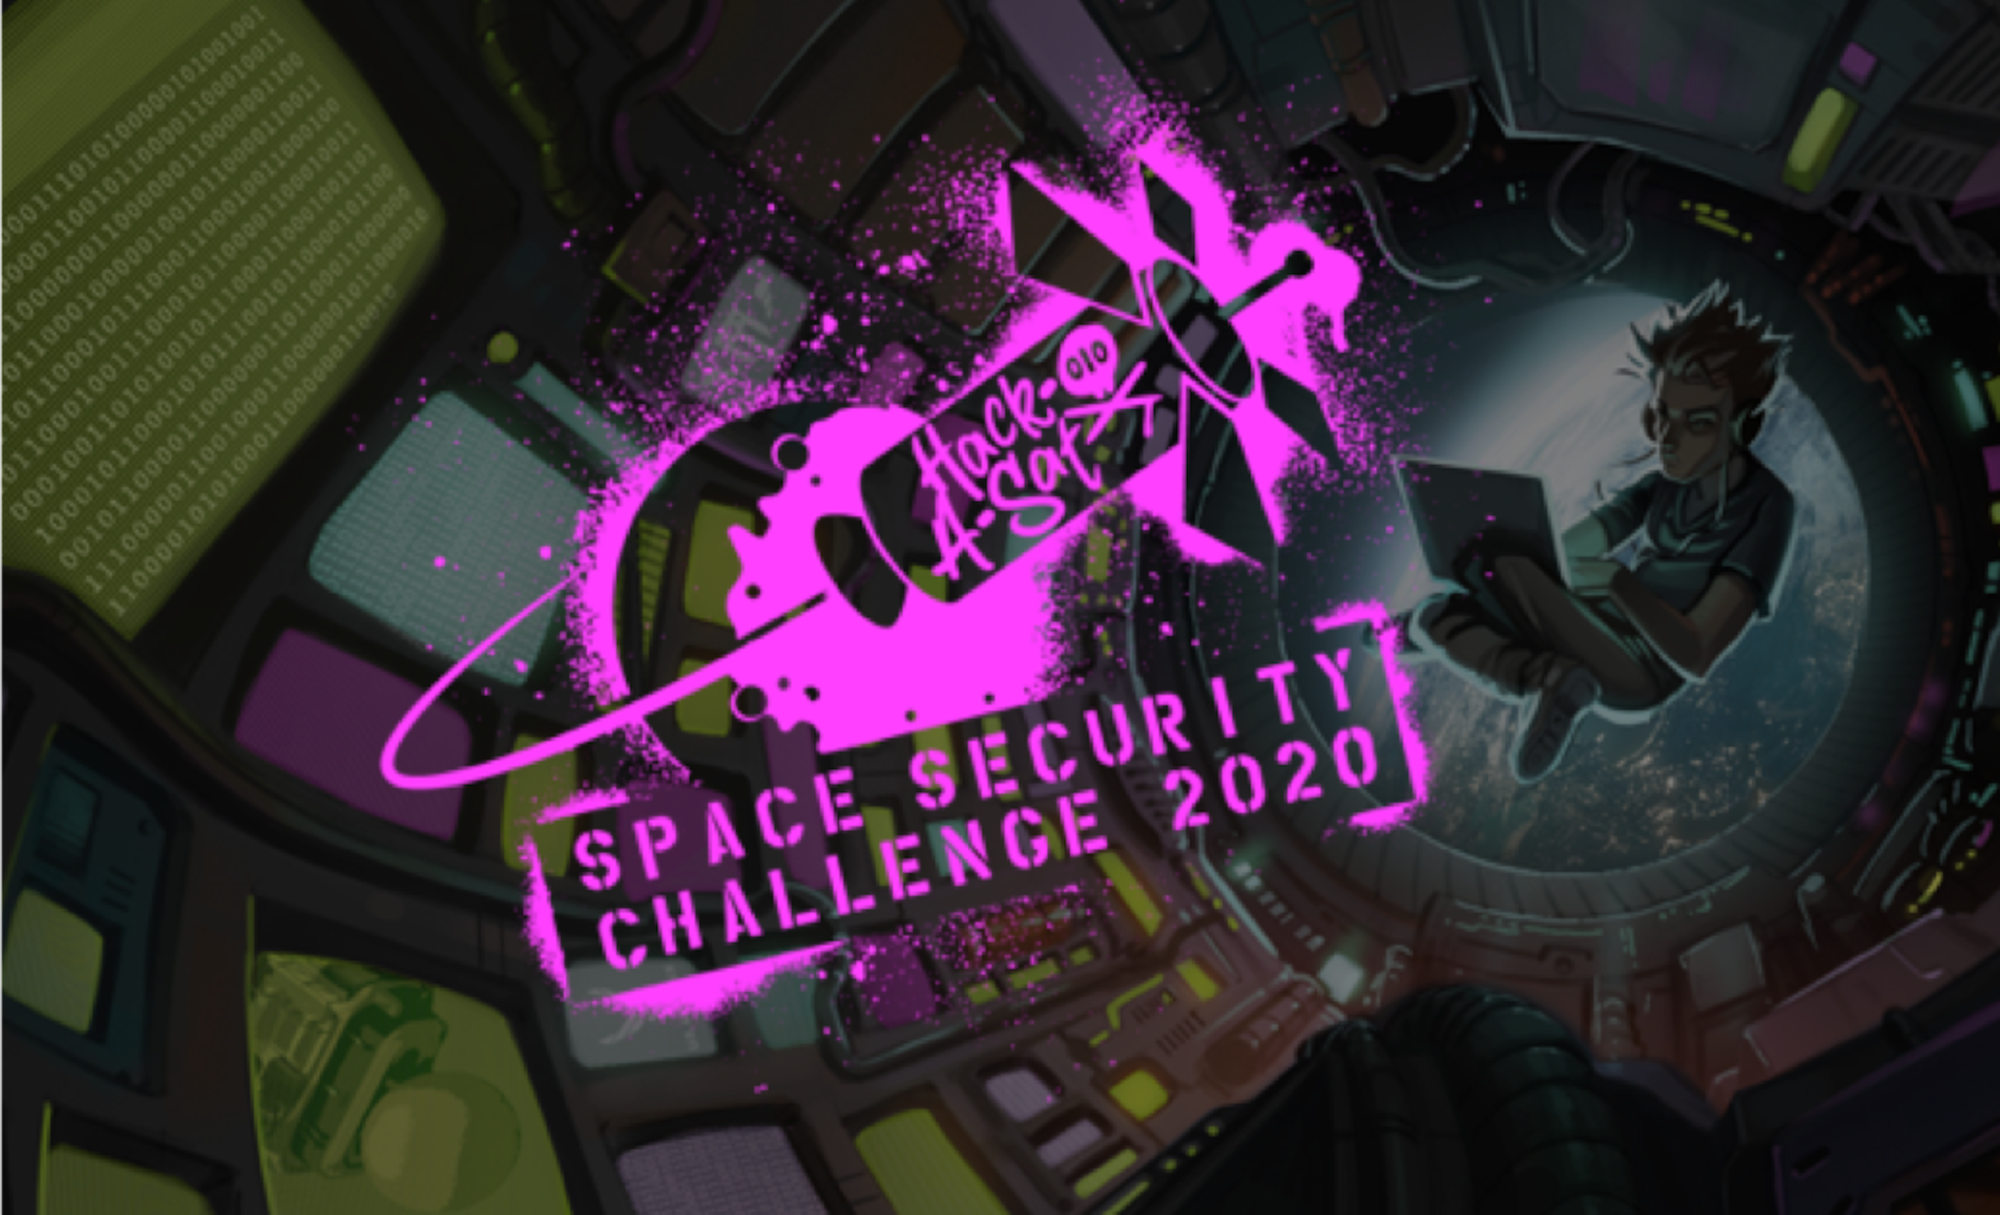 On August 7-9, the Department of the Air Force and DoD’s Defense Digital Service will premiere the Space Security Challenge 2020, a mixture of virtual workshops and prize challenges related to securing space systems, including a live Capture-The-Flag (CTF) style satellite hacking competition dubbed “Hack-A-Sat.” (Courtesy illustration)